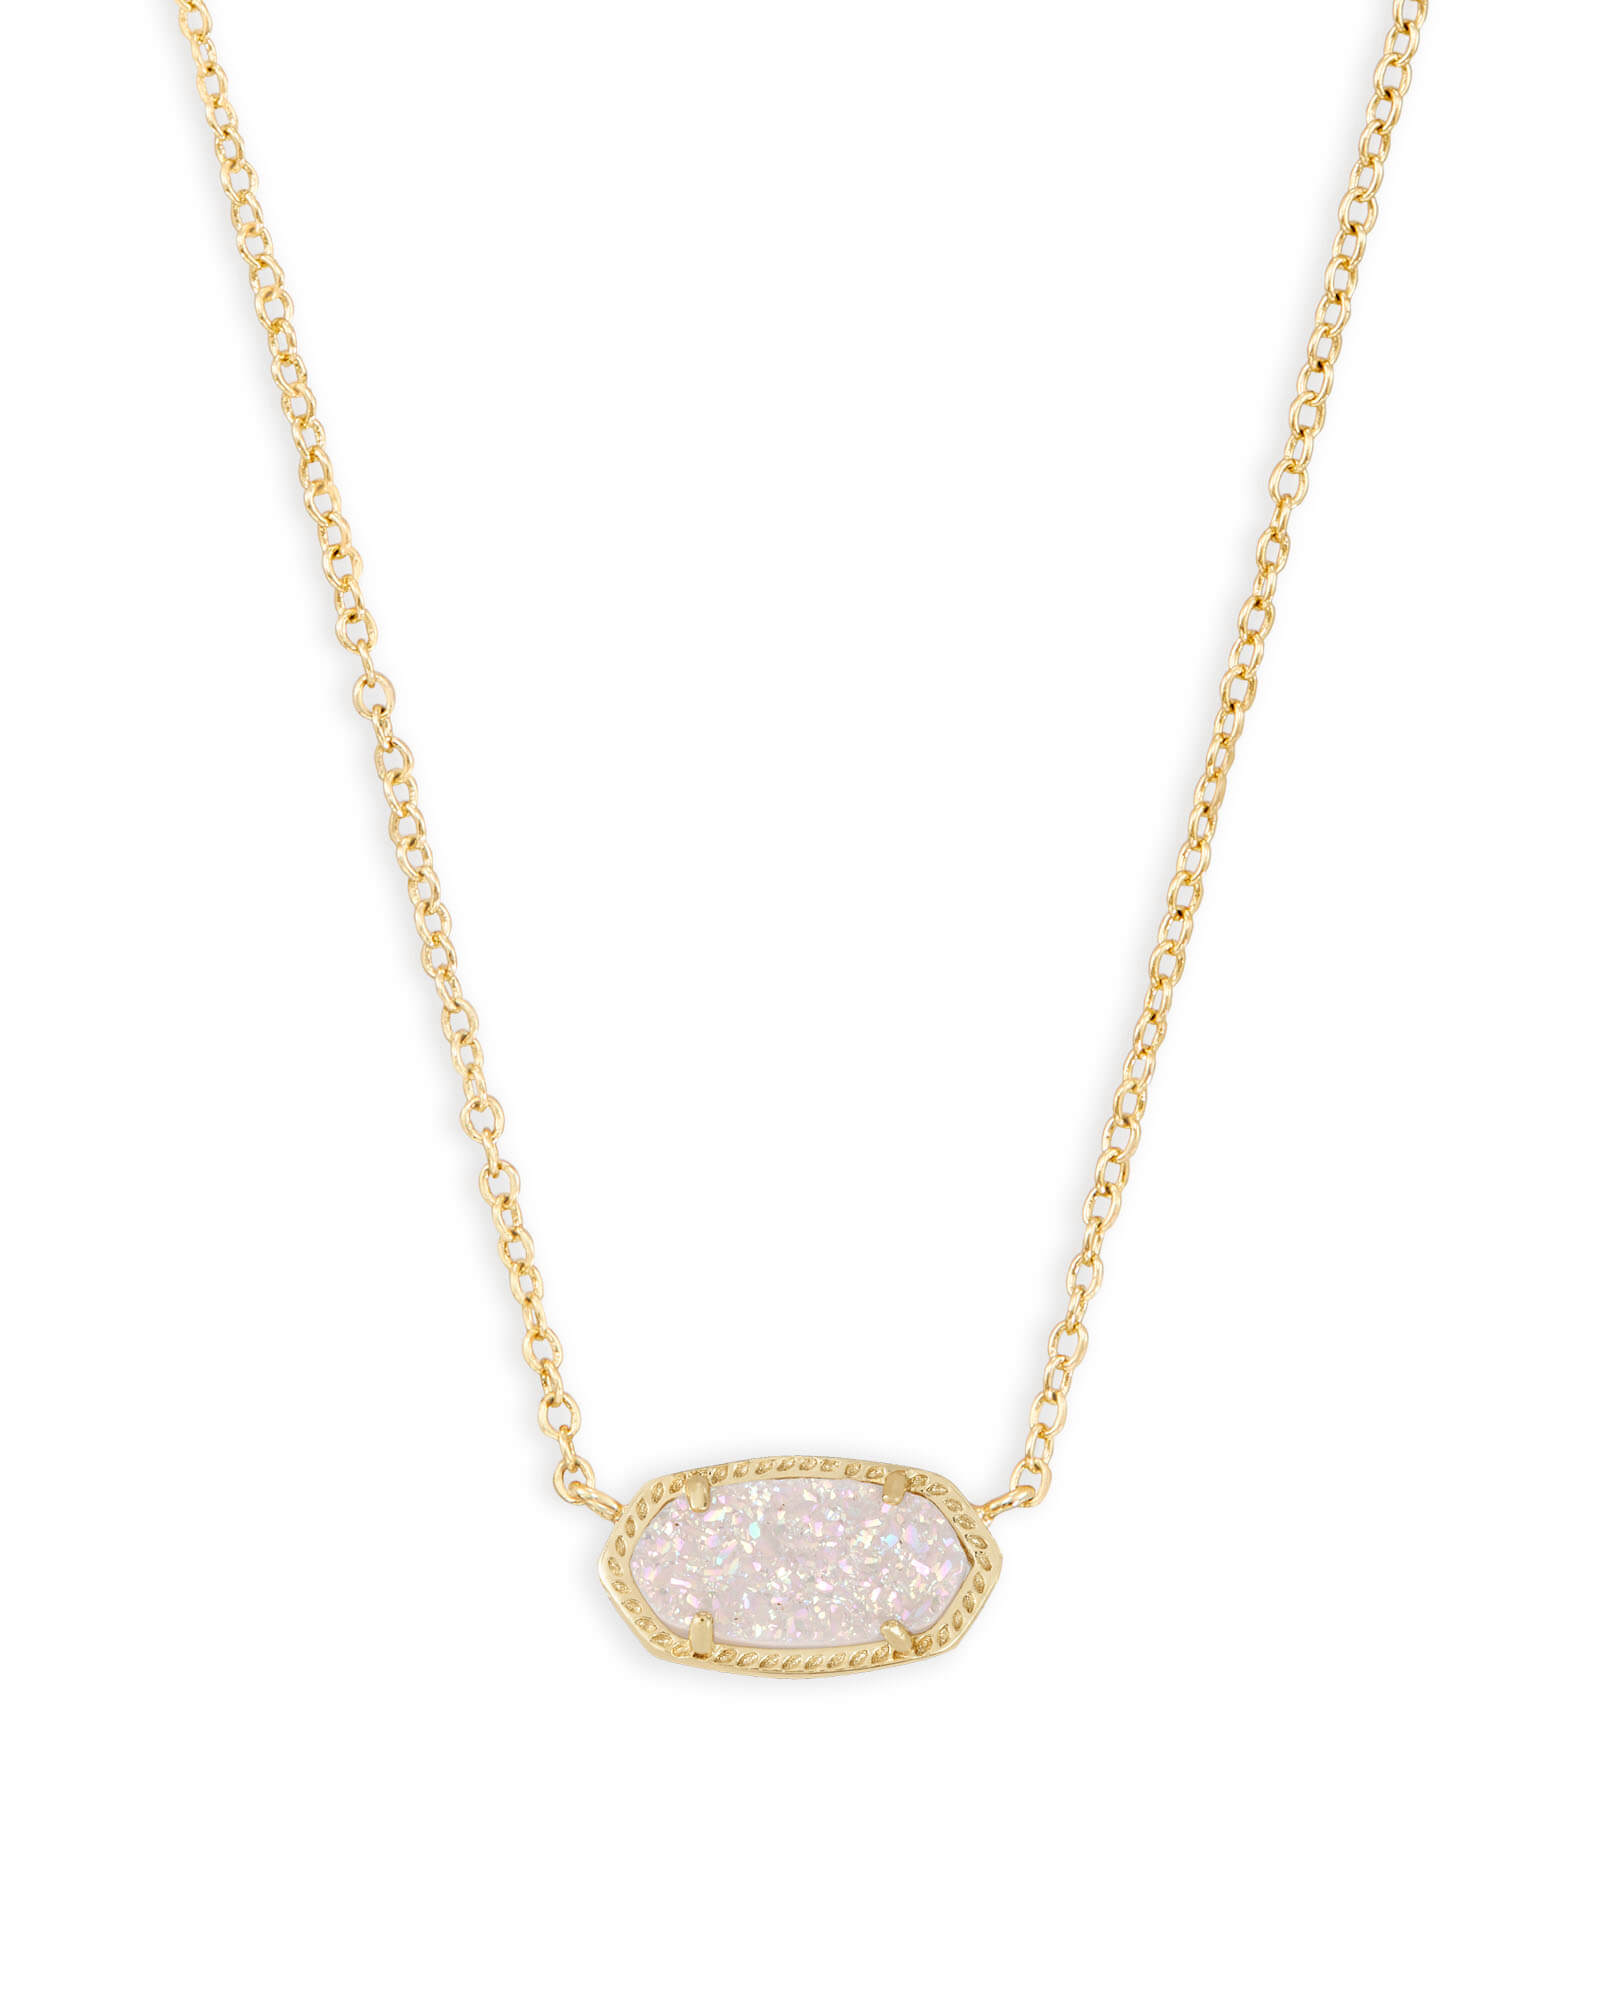 Kendra Scott Iridescent Drusy Necklace Rose Gold Plated